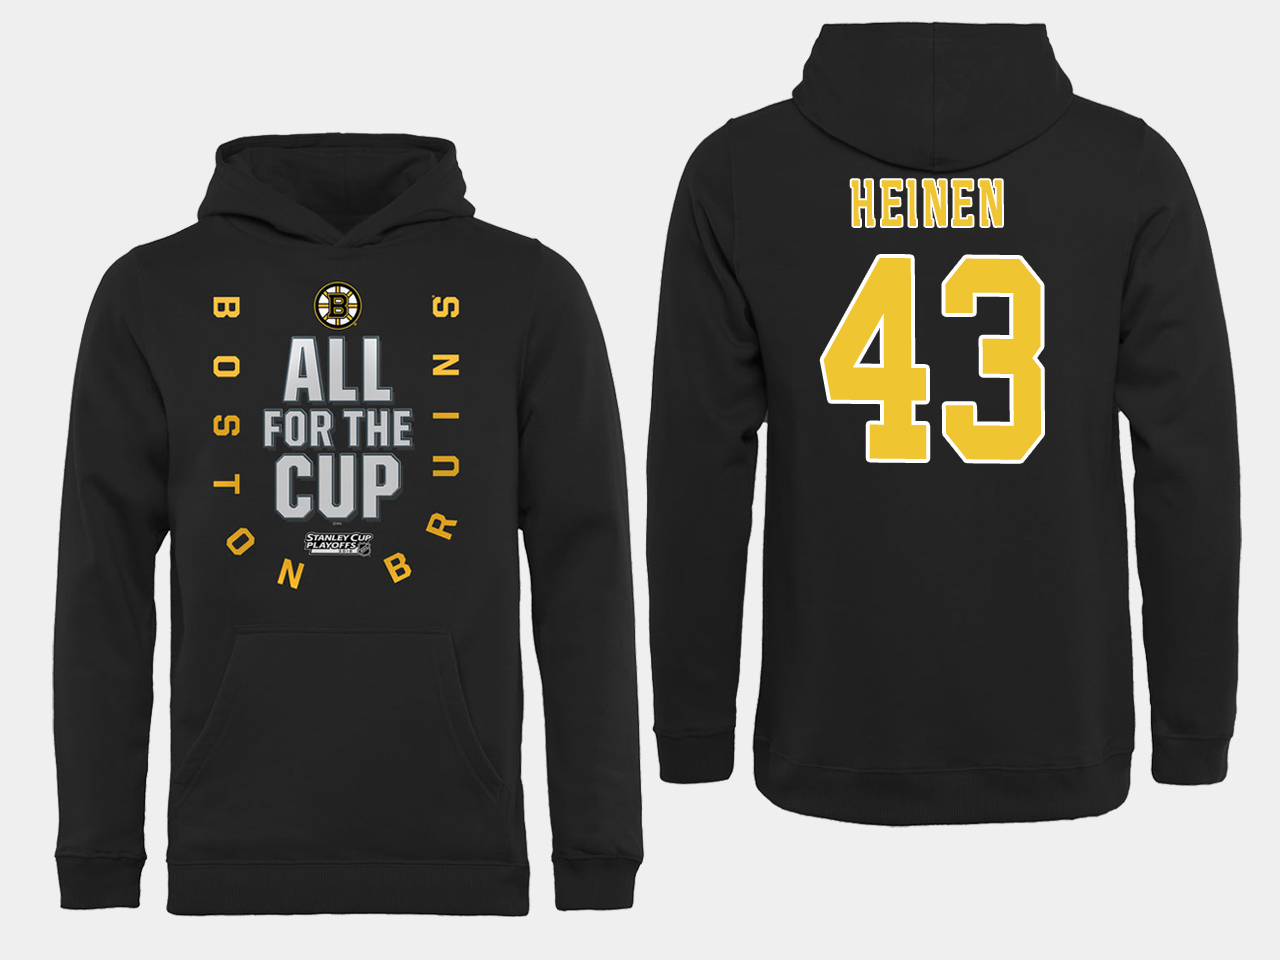 NHL Men Boston Bruins #43 Heinen Black All for the Cup Hoodie